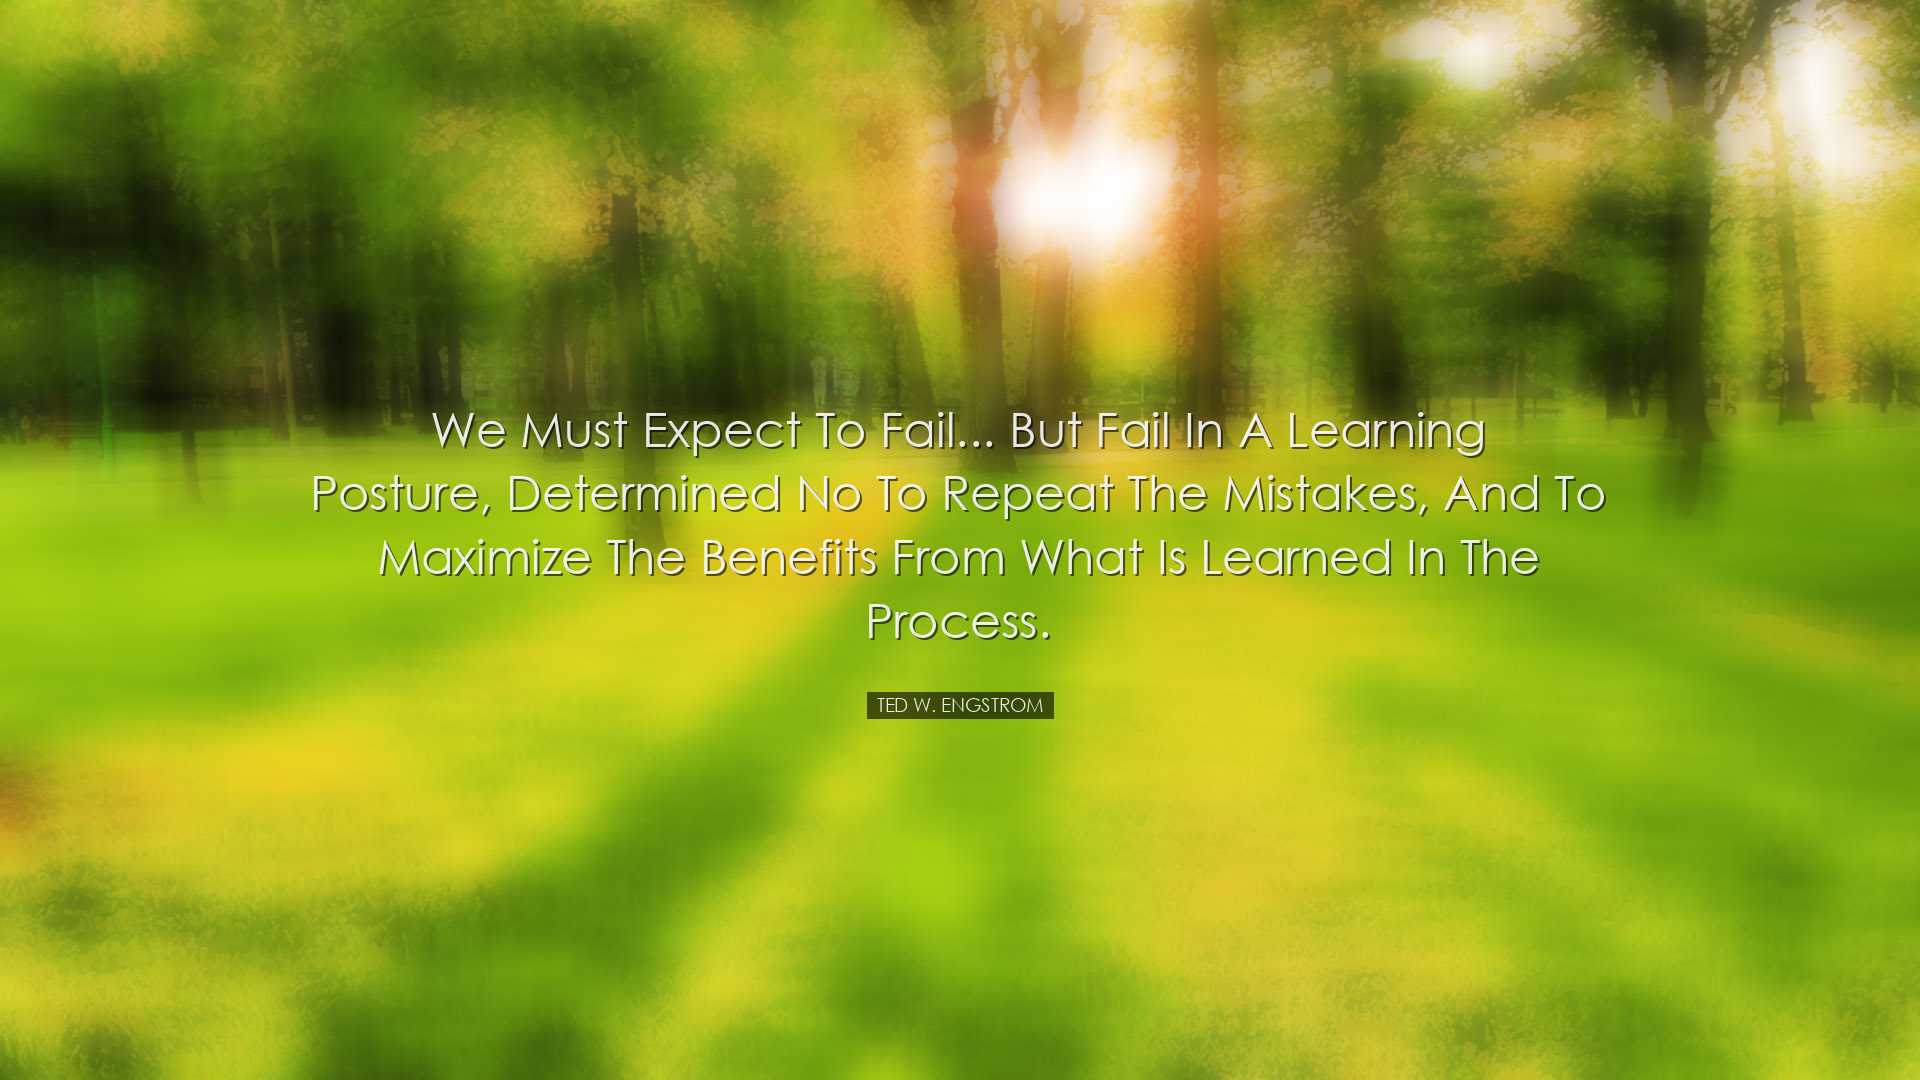 We must expect to fail... but fail in a learning posture, determin